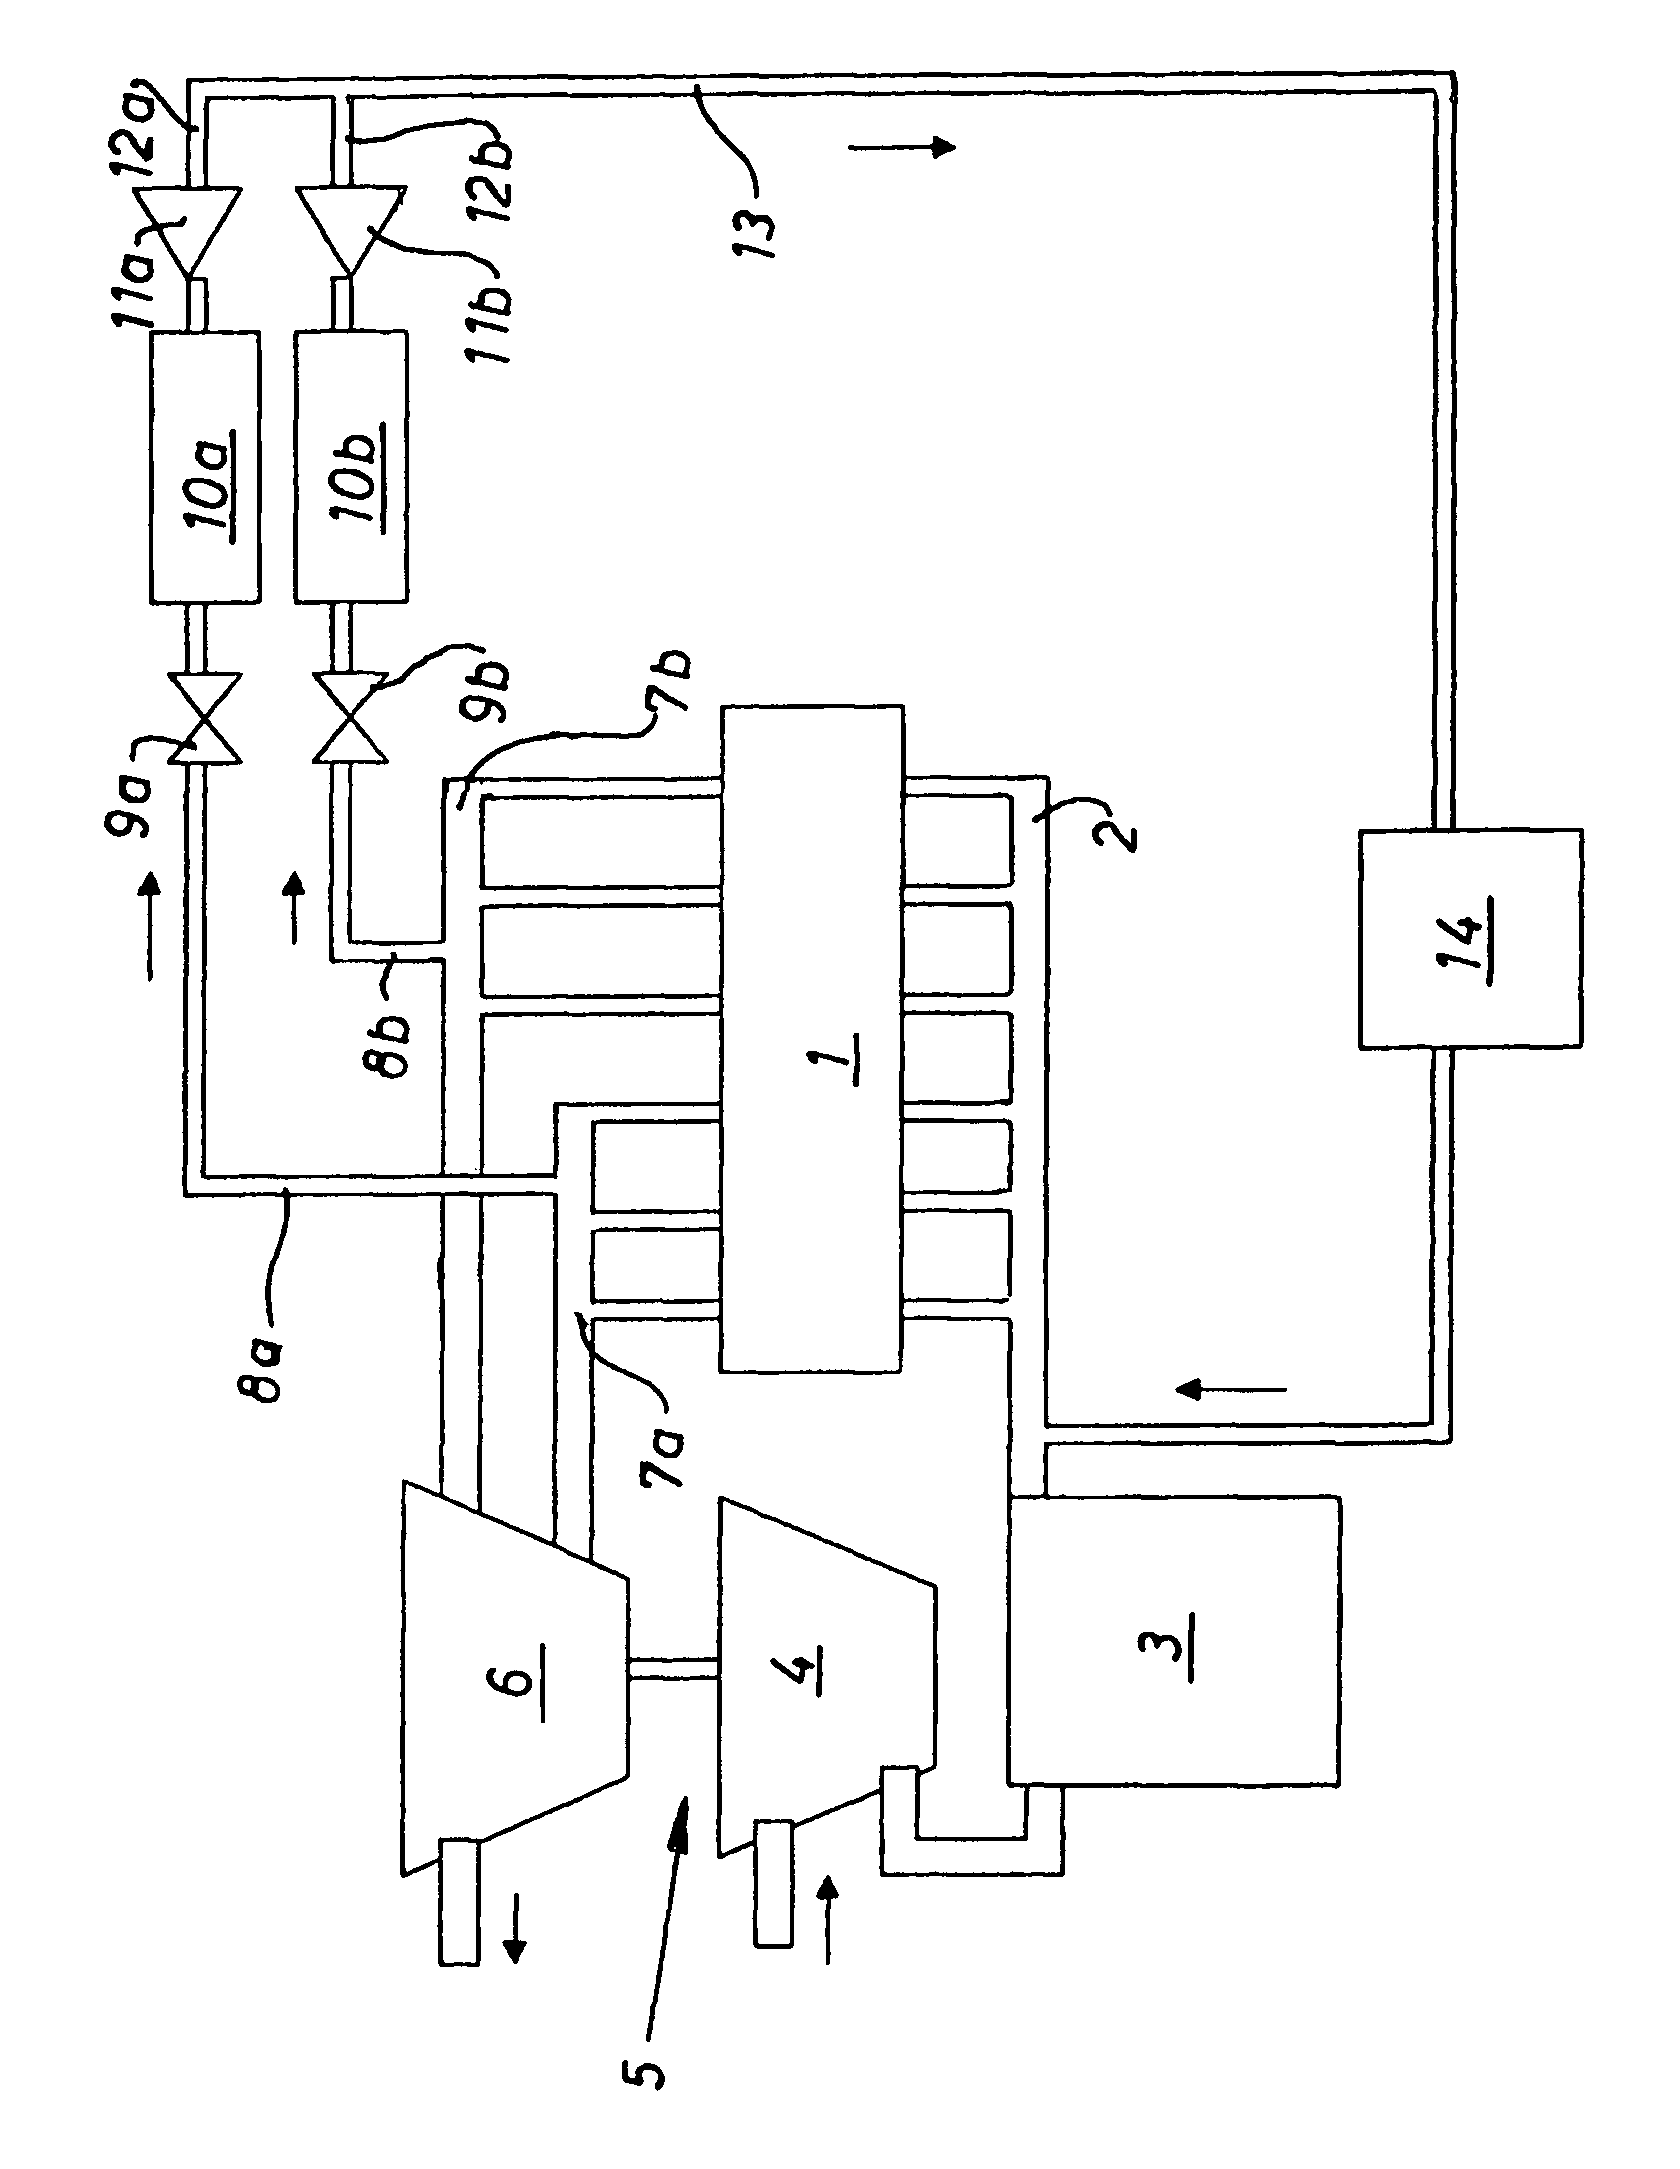 Two-stage cooled exhaust gas recirculation system